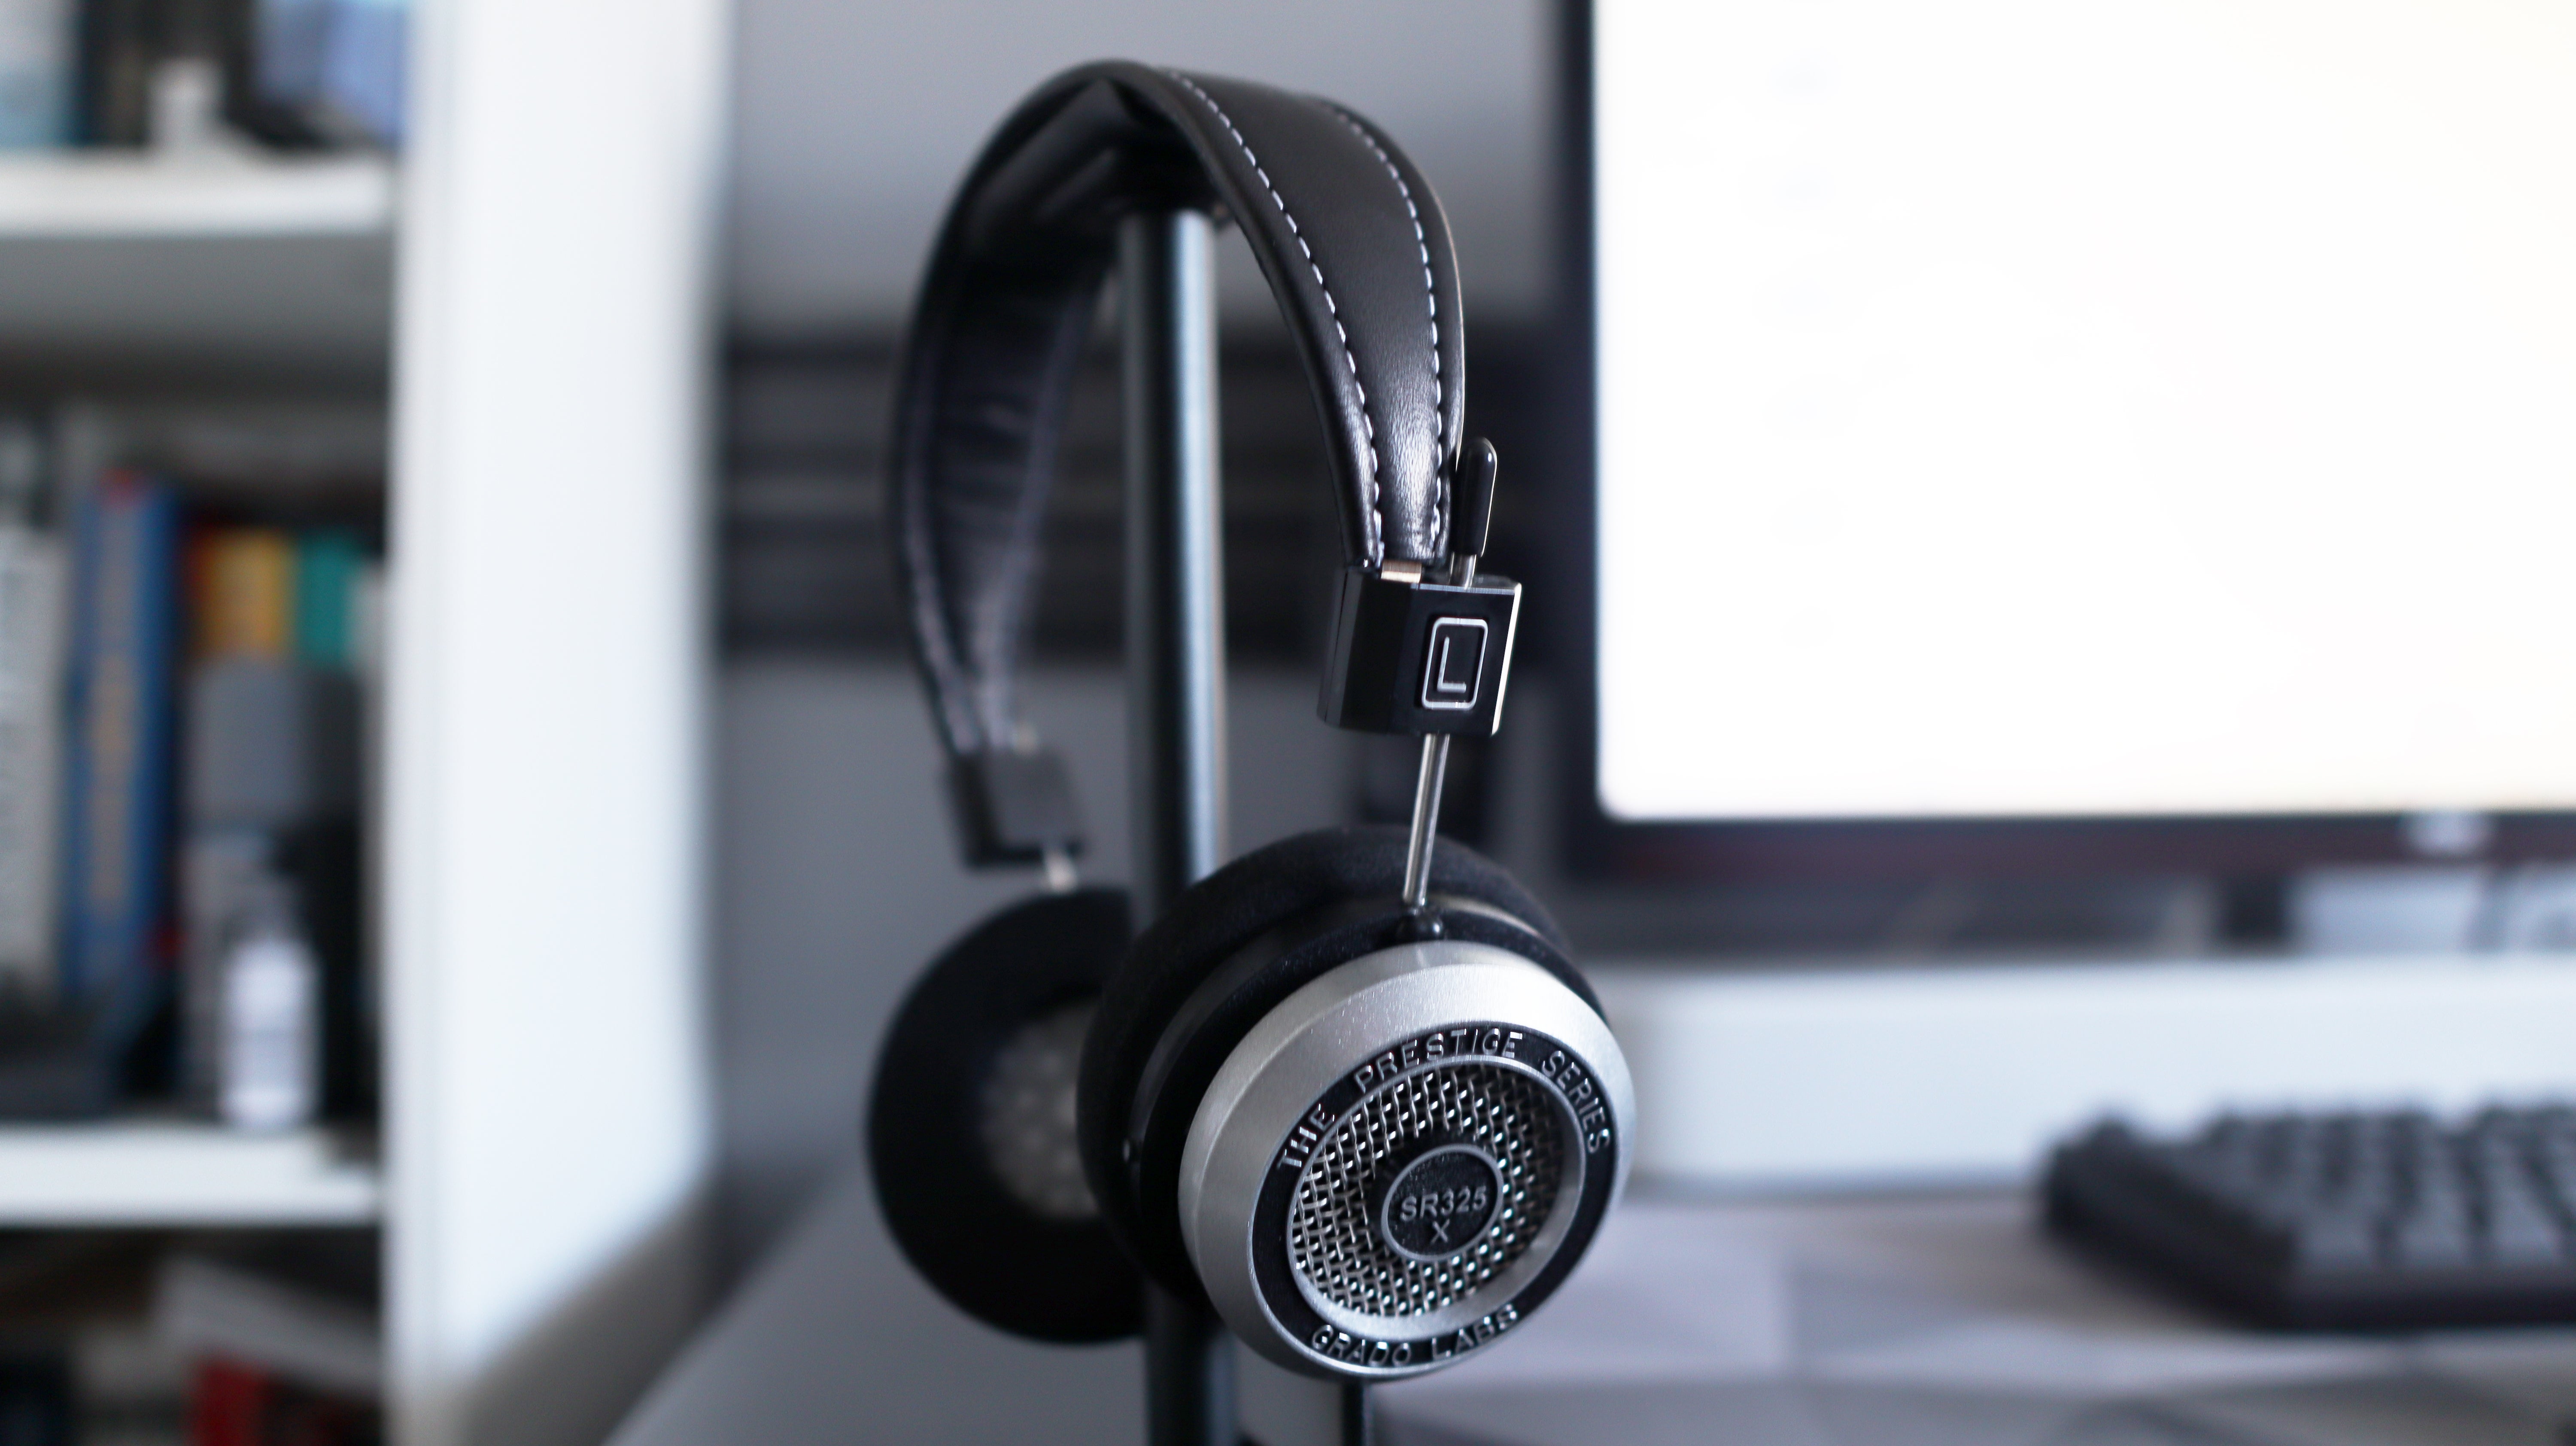 Grado SR325x review: Ideal cans for home-listening and even gaming 